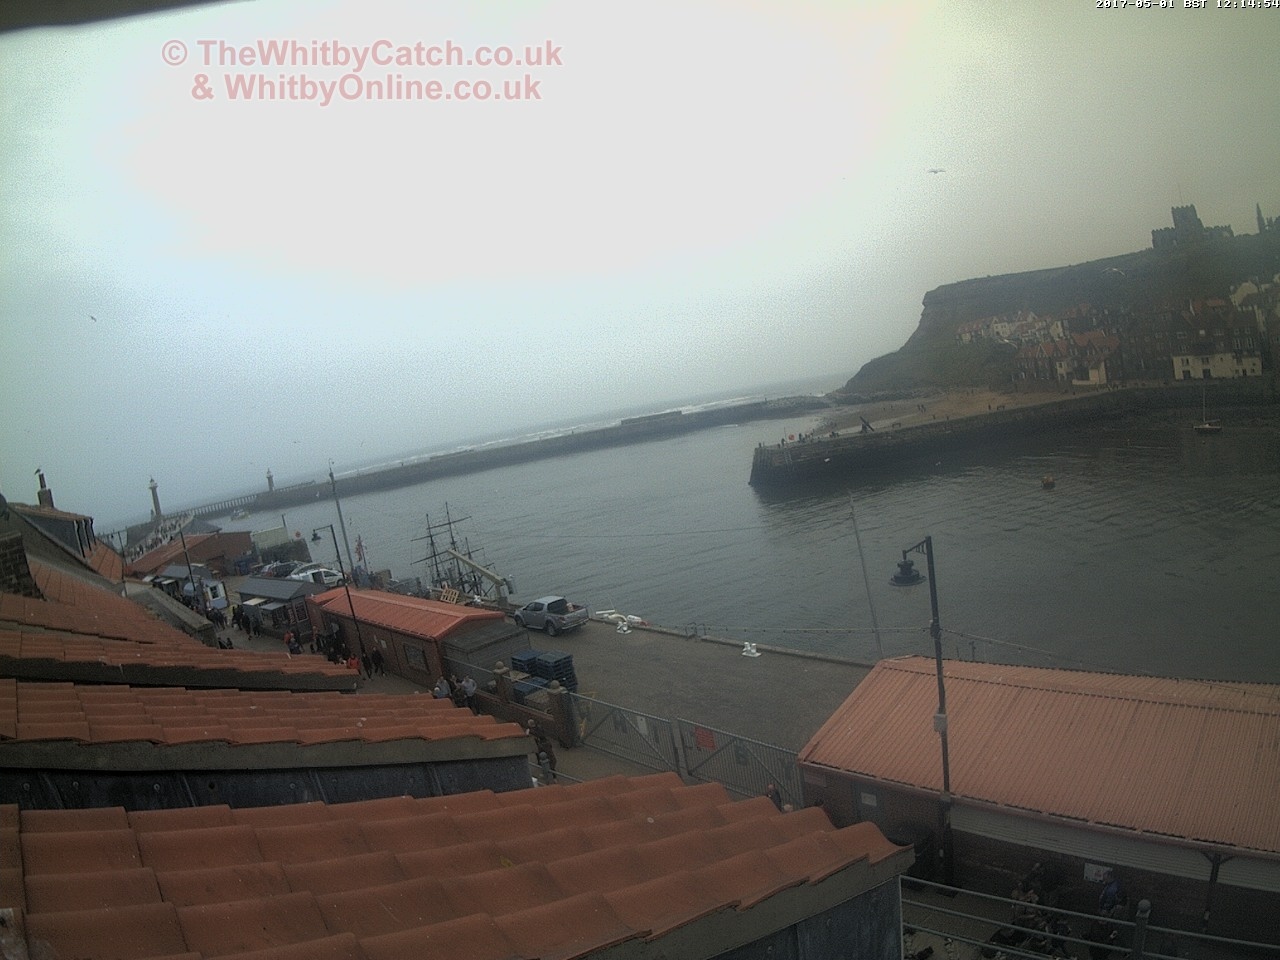 Whitby Mon 1st May 2017 12:15.